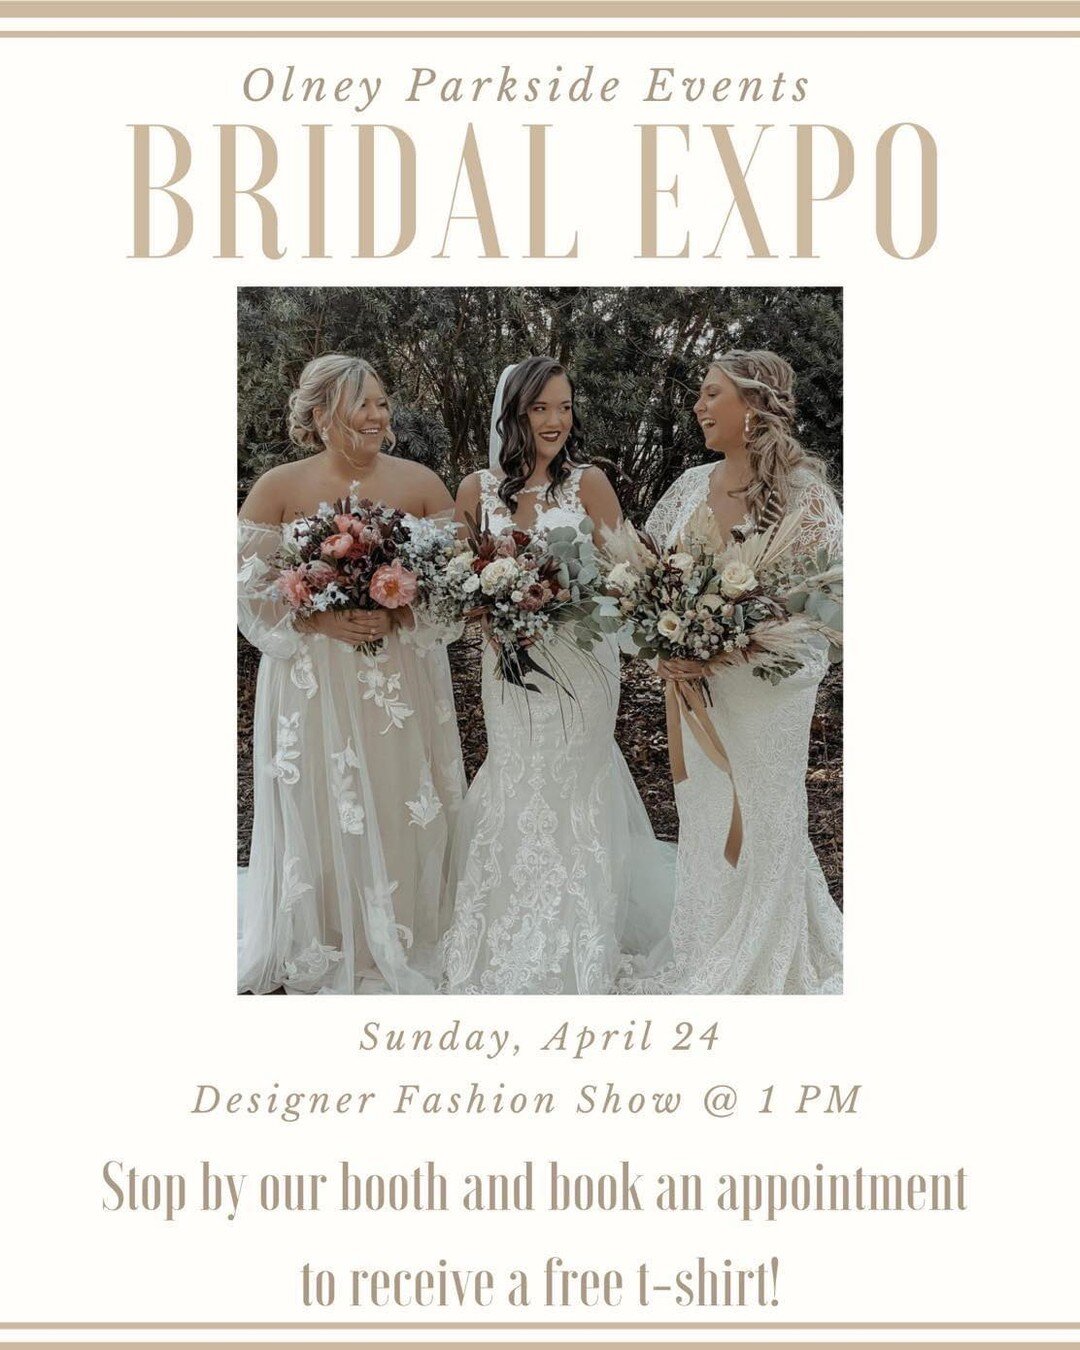 Make sure you stop by our booth and book an appointment for a free t-shirt ❤️🌹

#wildrosebridal